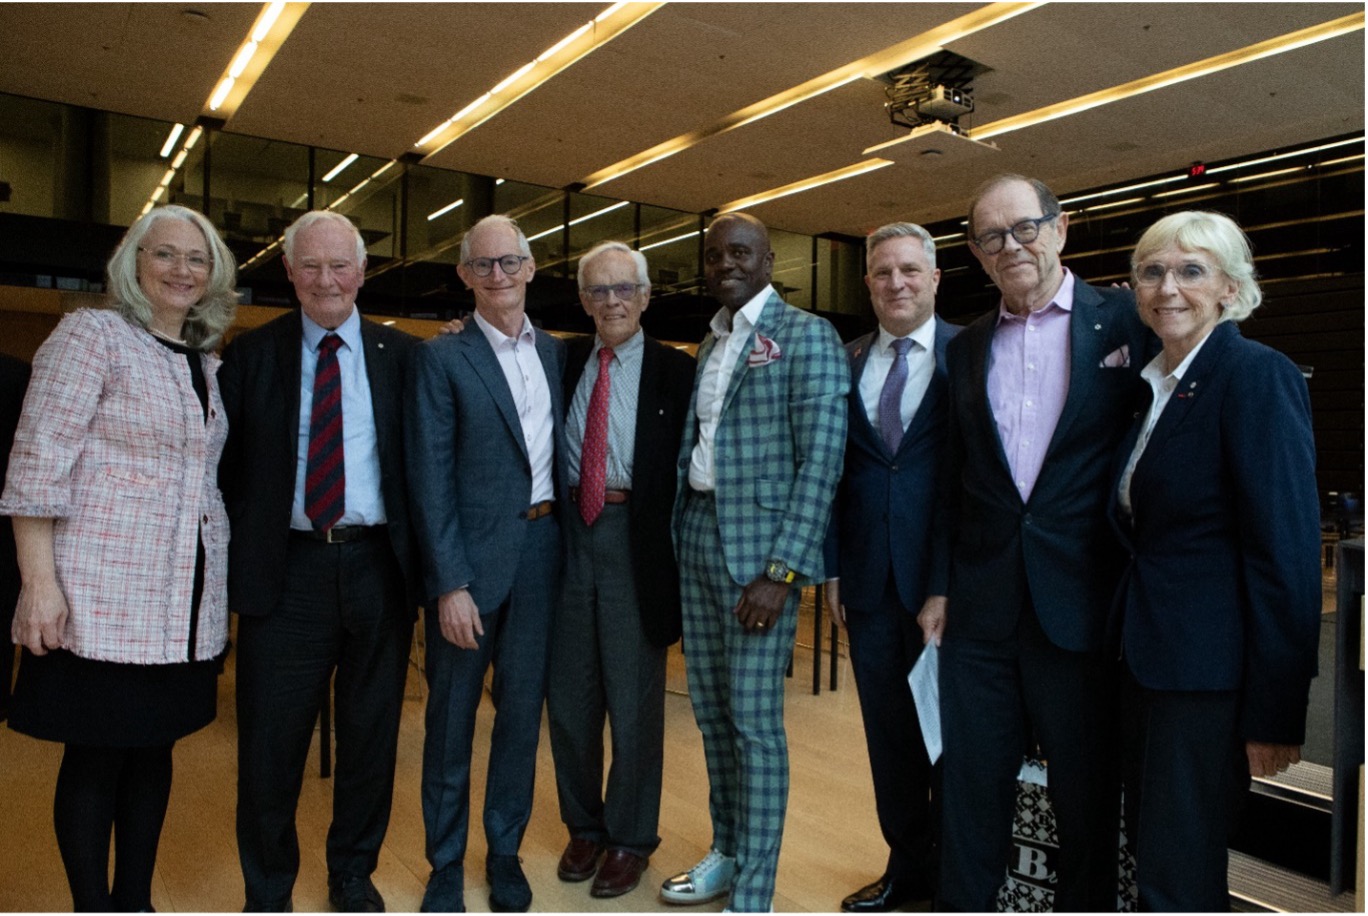 From left to right: Susan Christoffersen, Dean, Rotman School of Management; The Right Honourable David Johnston, former Governor General of Canada; Jochen Tilk, Director; Claude Lamoureux, Former CEO, Ontario Teachers’ Pension Plan; Wes Hall, Executive Chairman and Founder, WeShall Investments Inc.; Alexander Dyck, Professor and Academic Director – Johnston Centre, Rotman School of Management; David Beatty, Professor of Strategic Management, Rotman School of Management; Françoise Bertrand, o.c., c.q., Chairperson of the Board of Directors, VIA Rail Canada.